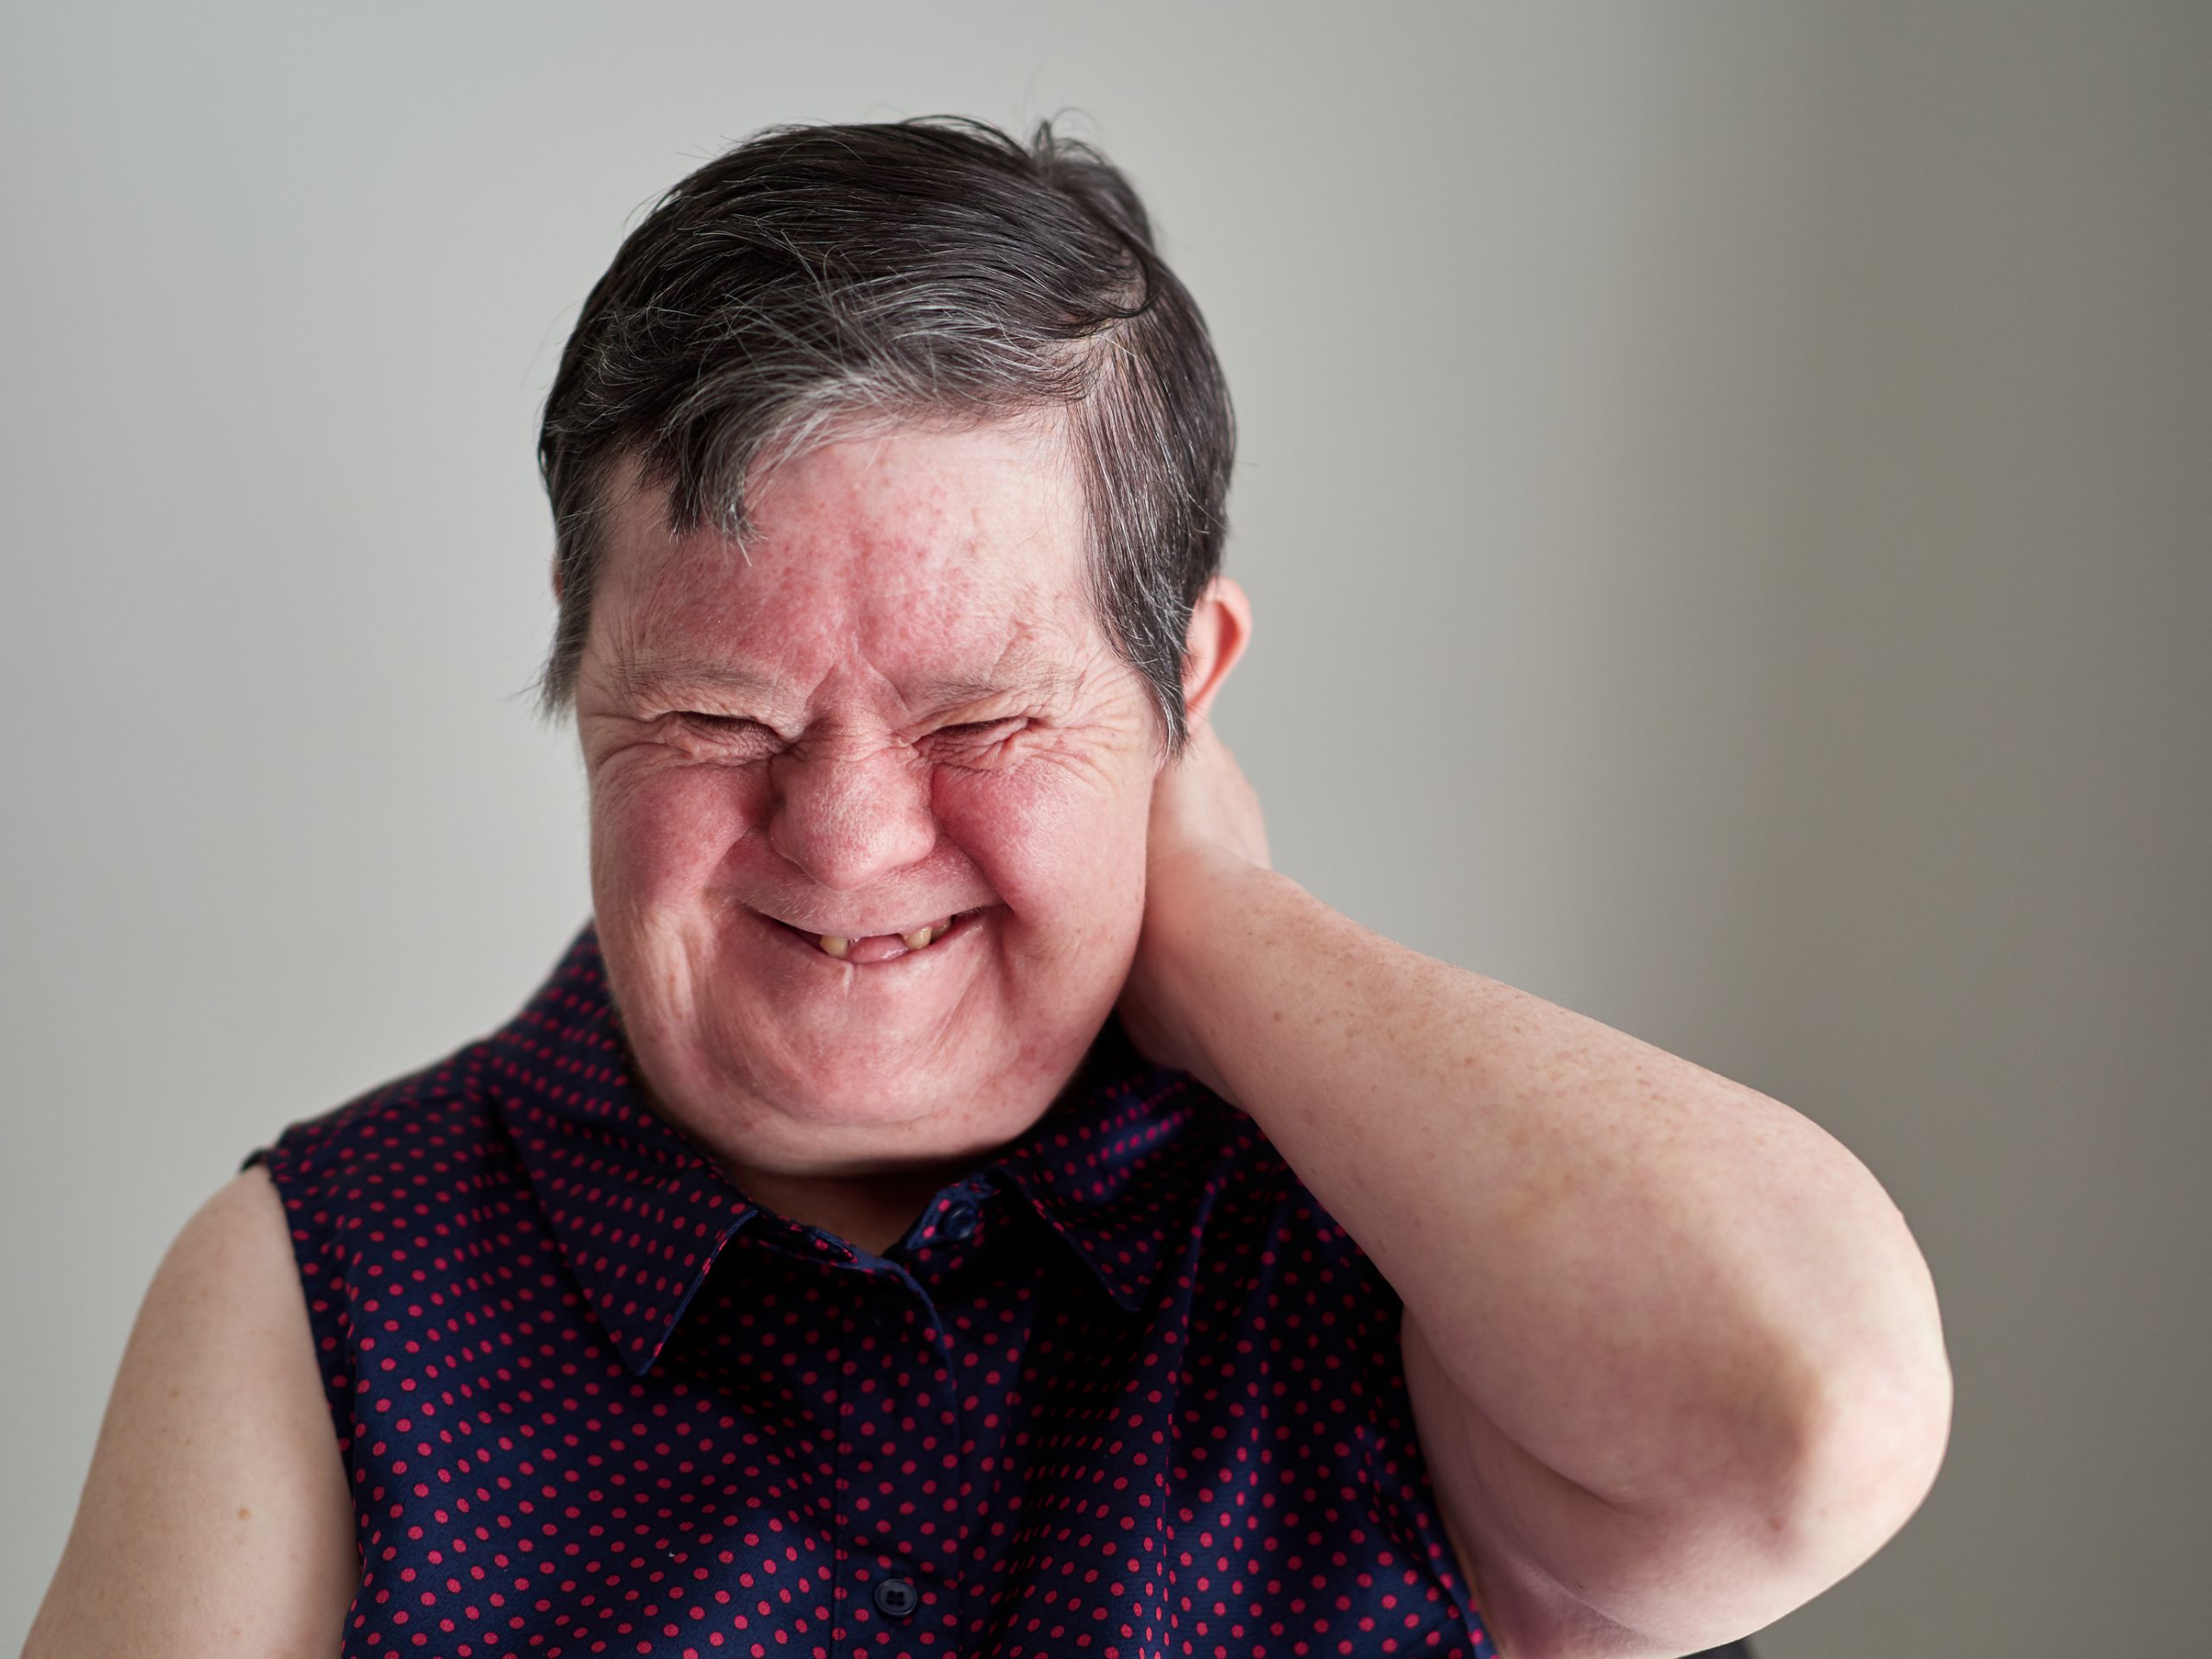 Photo of a woman with disability, laughing with her hand up behind her head.